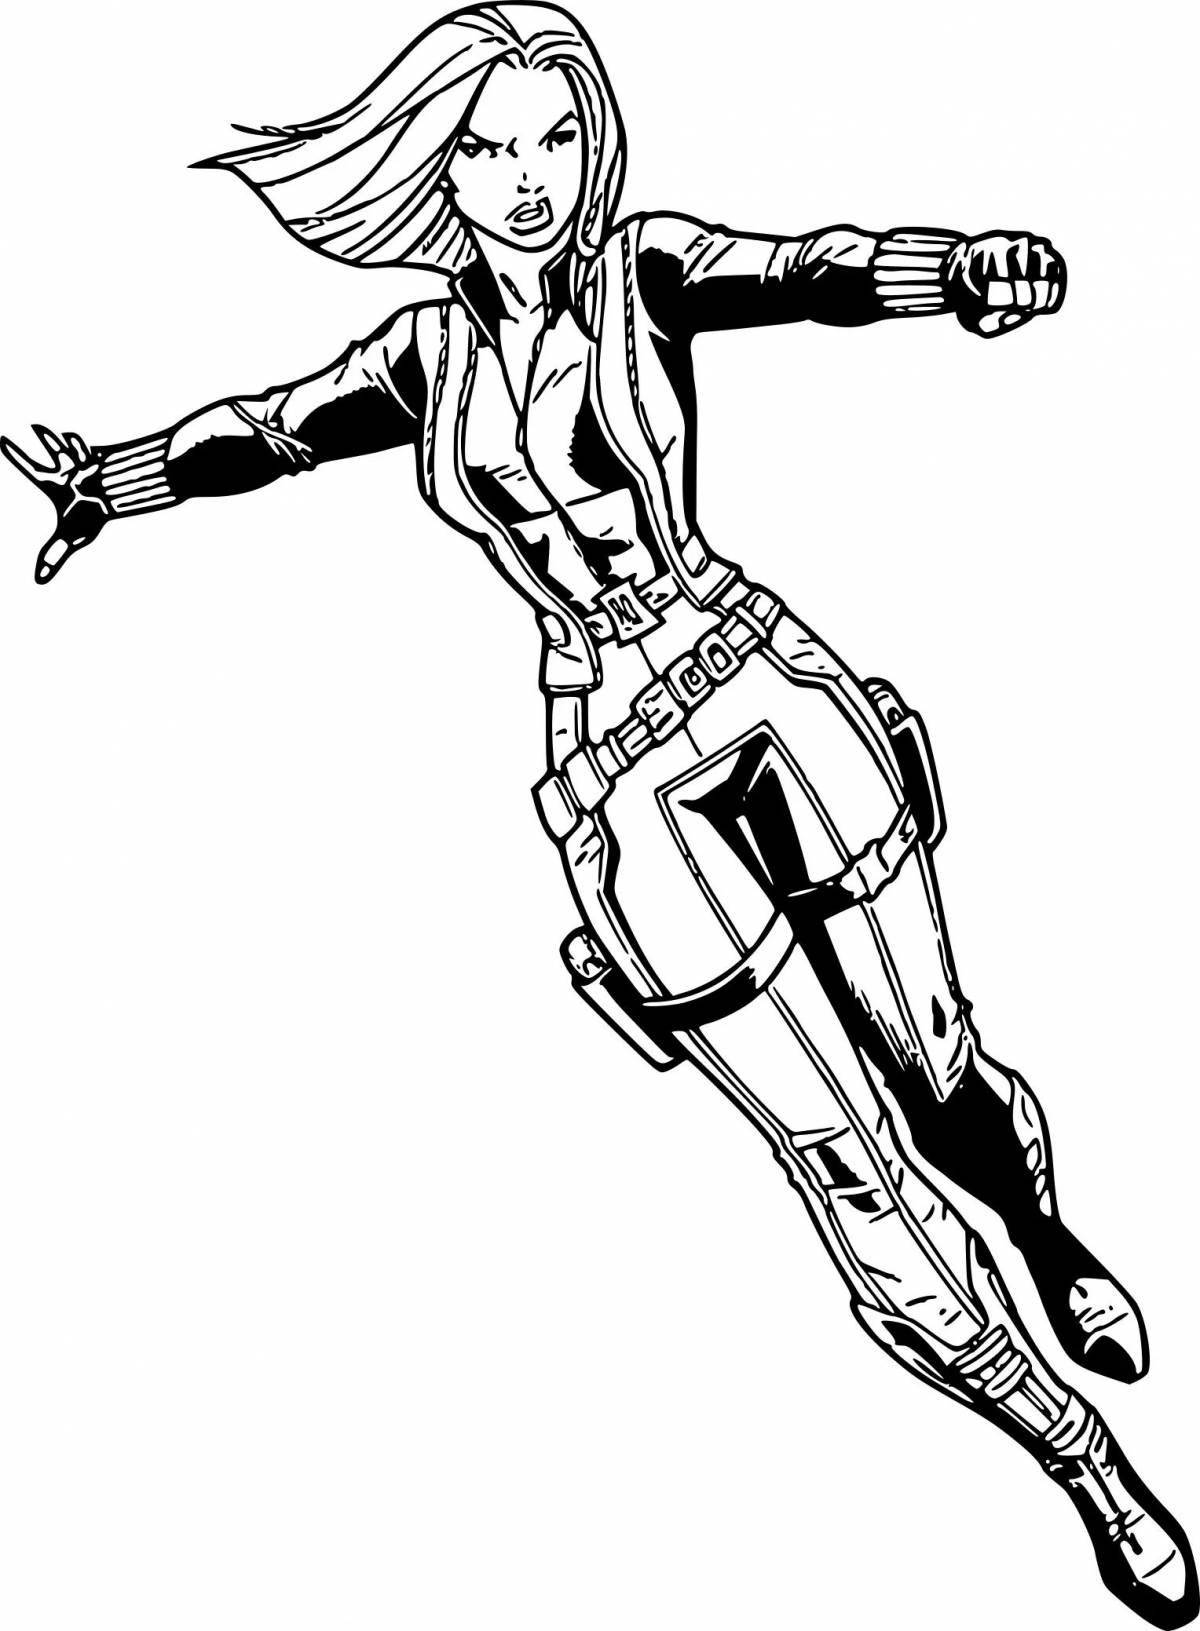 Glorious black widow coloring page